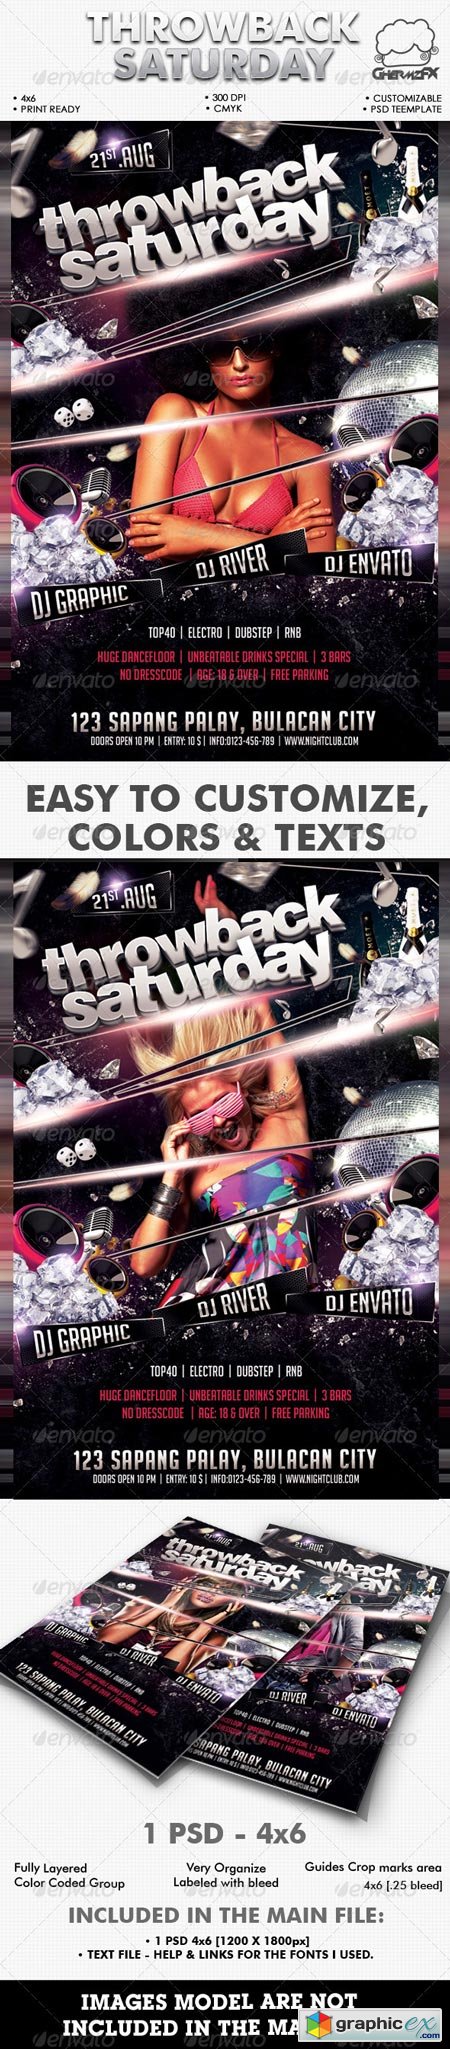 Throwback Saturday Flyer Template 2627695